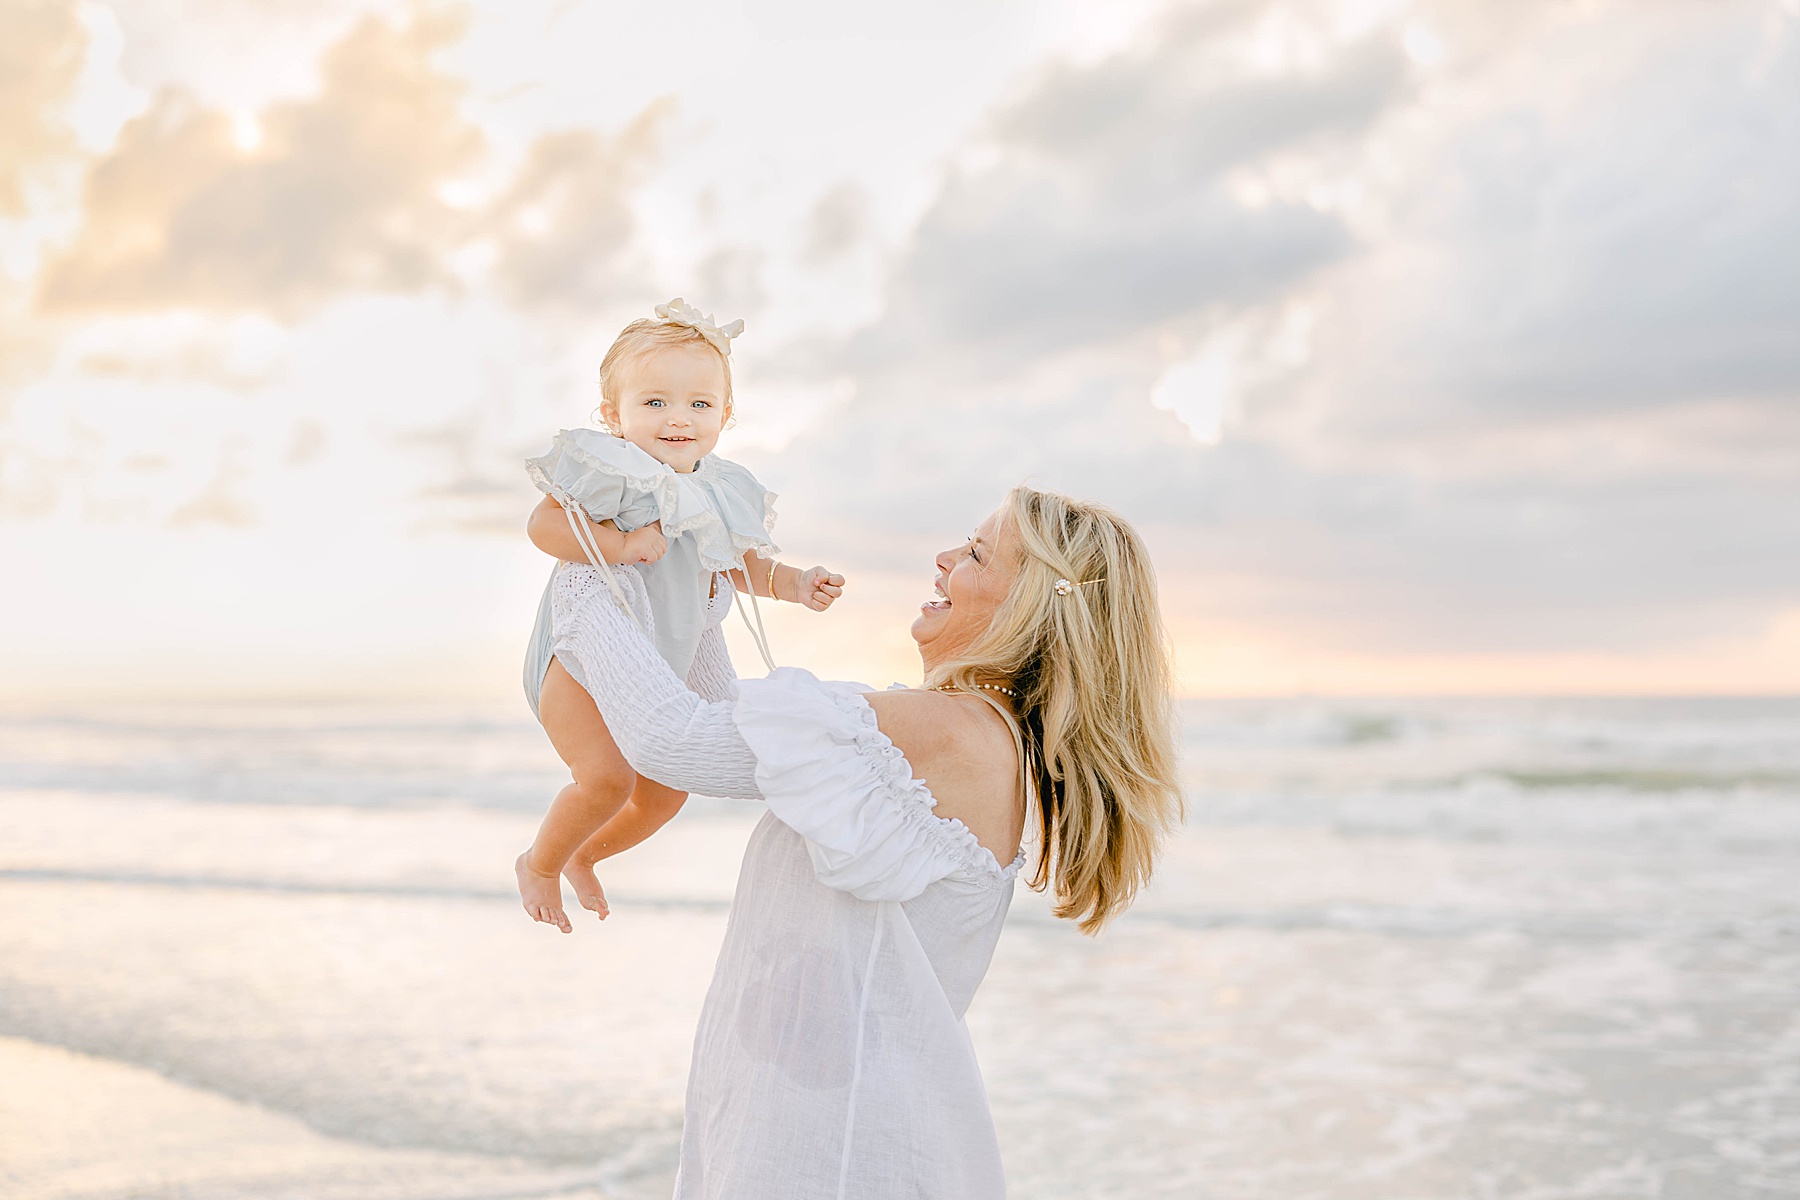 older woman in white dress holding baby in the water at the beach at sunrise